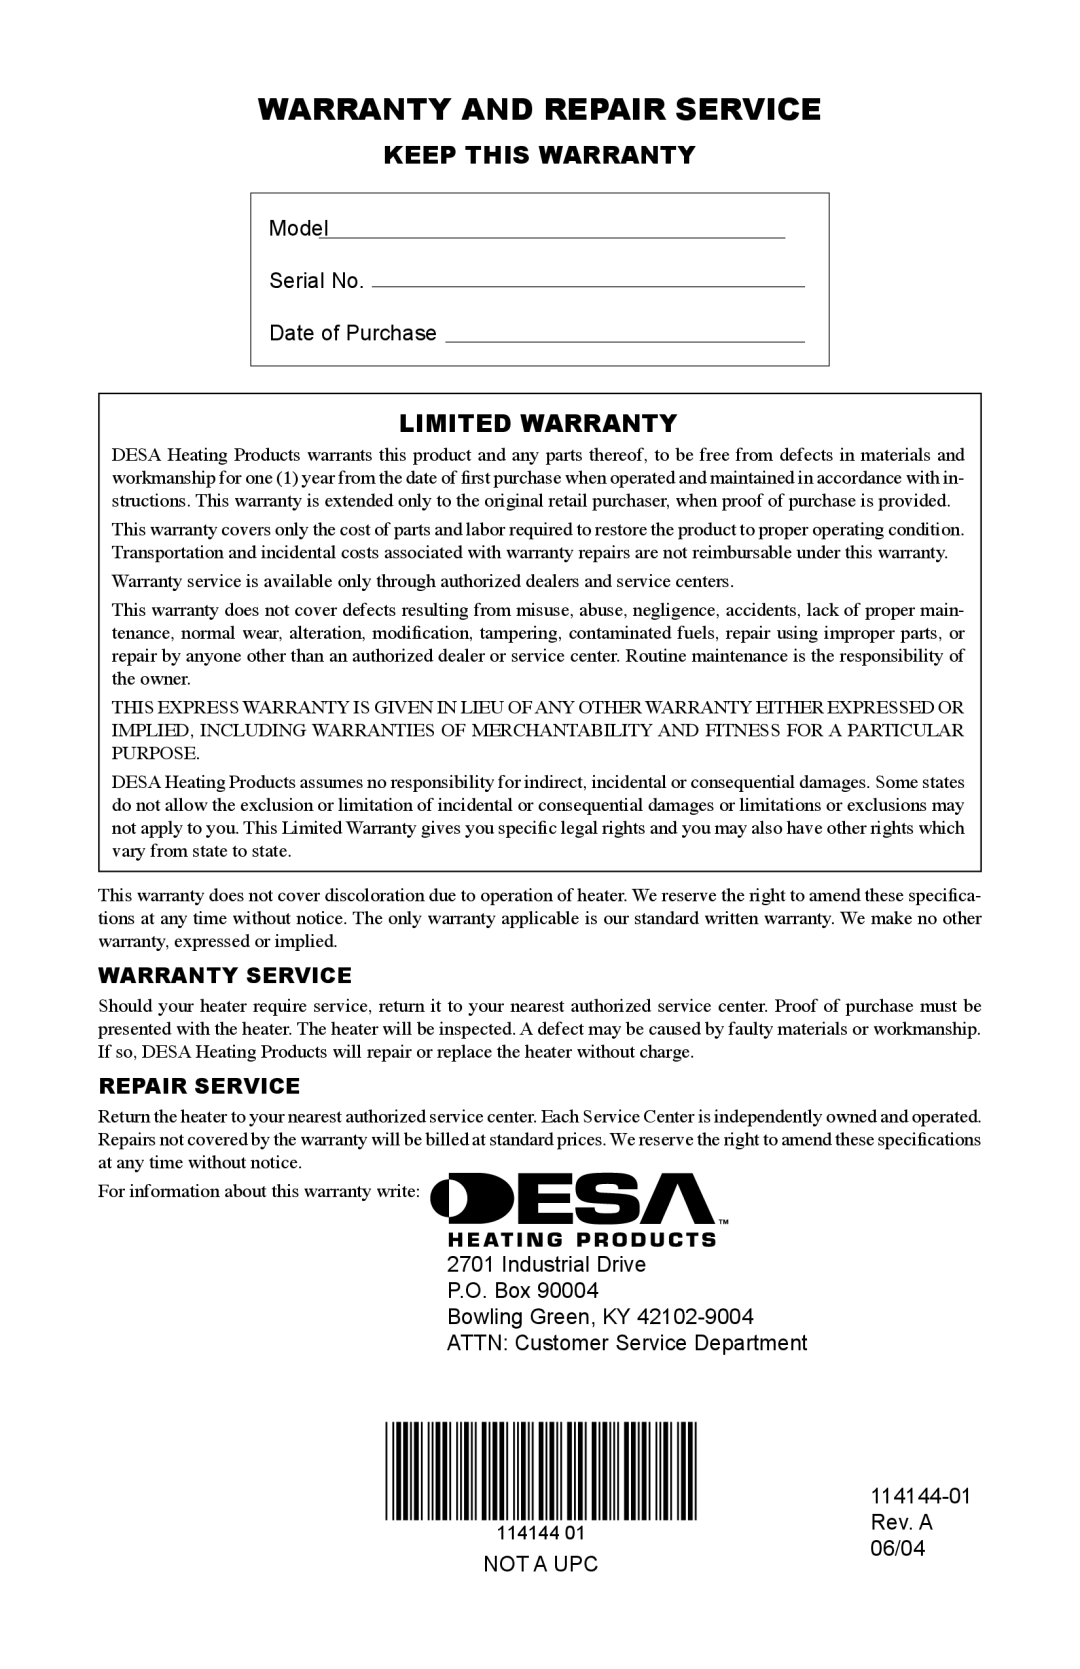 Desa SPC-54PHW Warranty And Repair Service, Model Serial No Date of Purchase, Industrial Drive P.O. Box Bowling Green, KY 